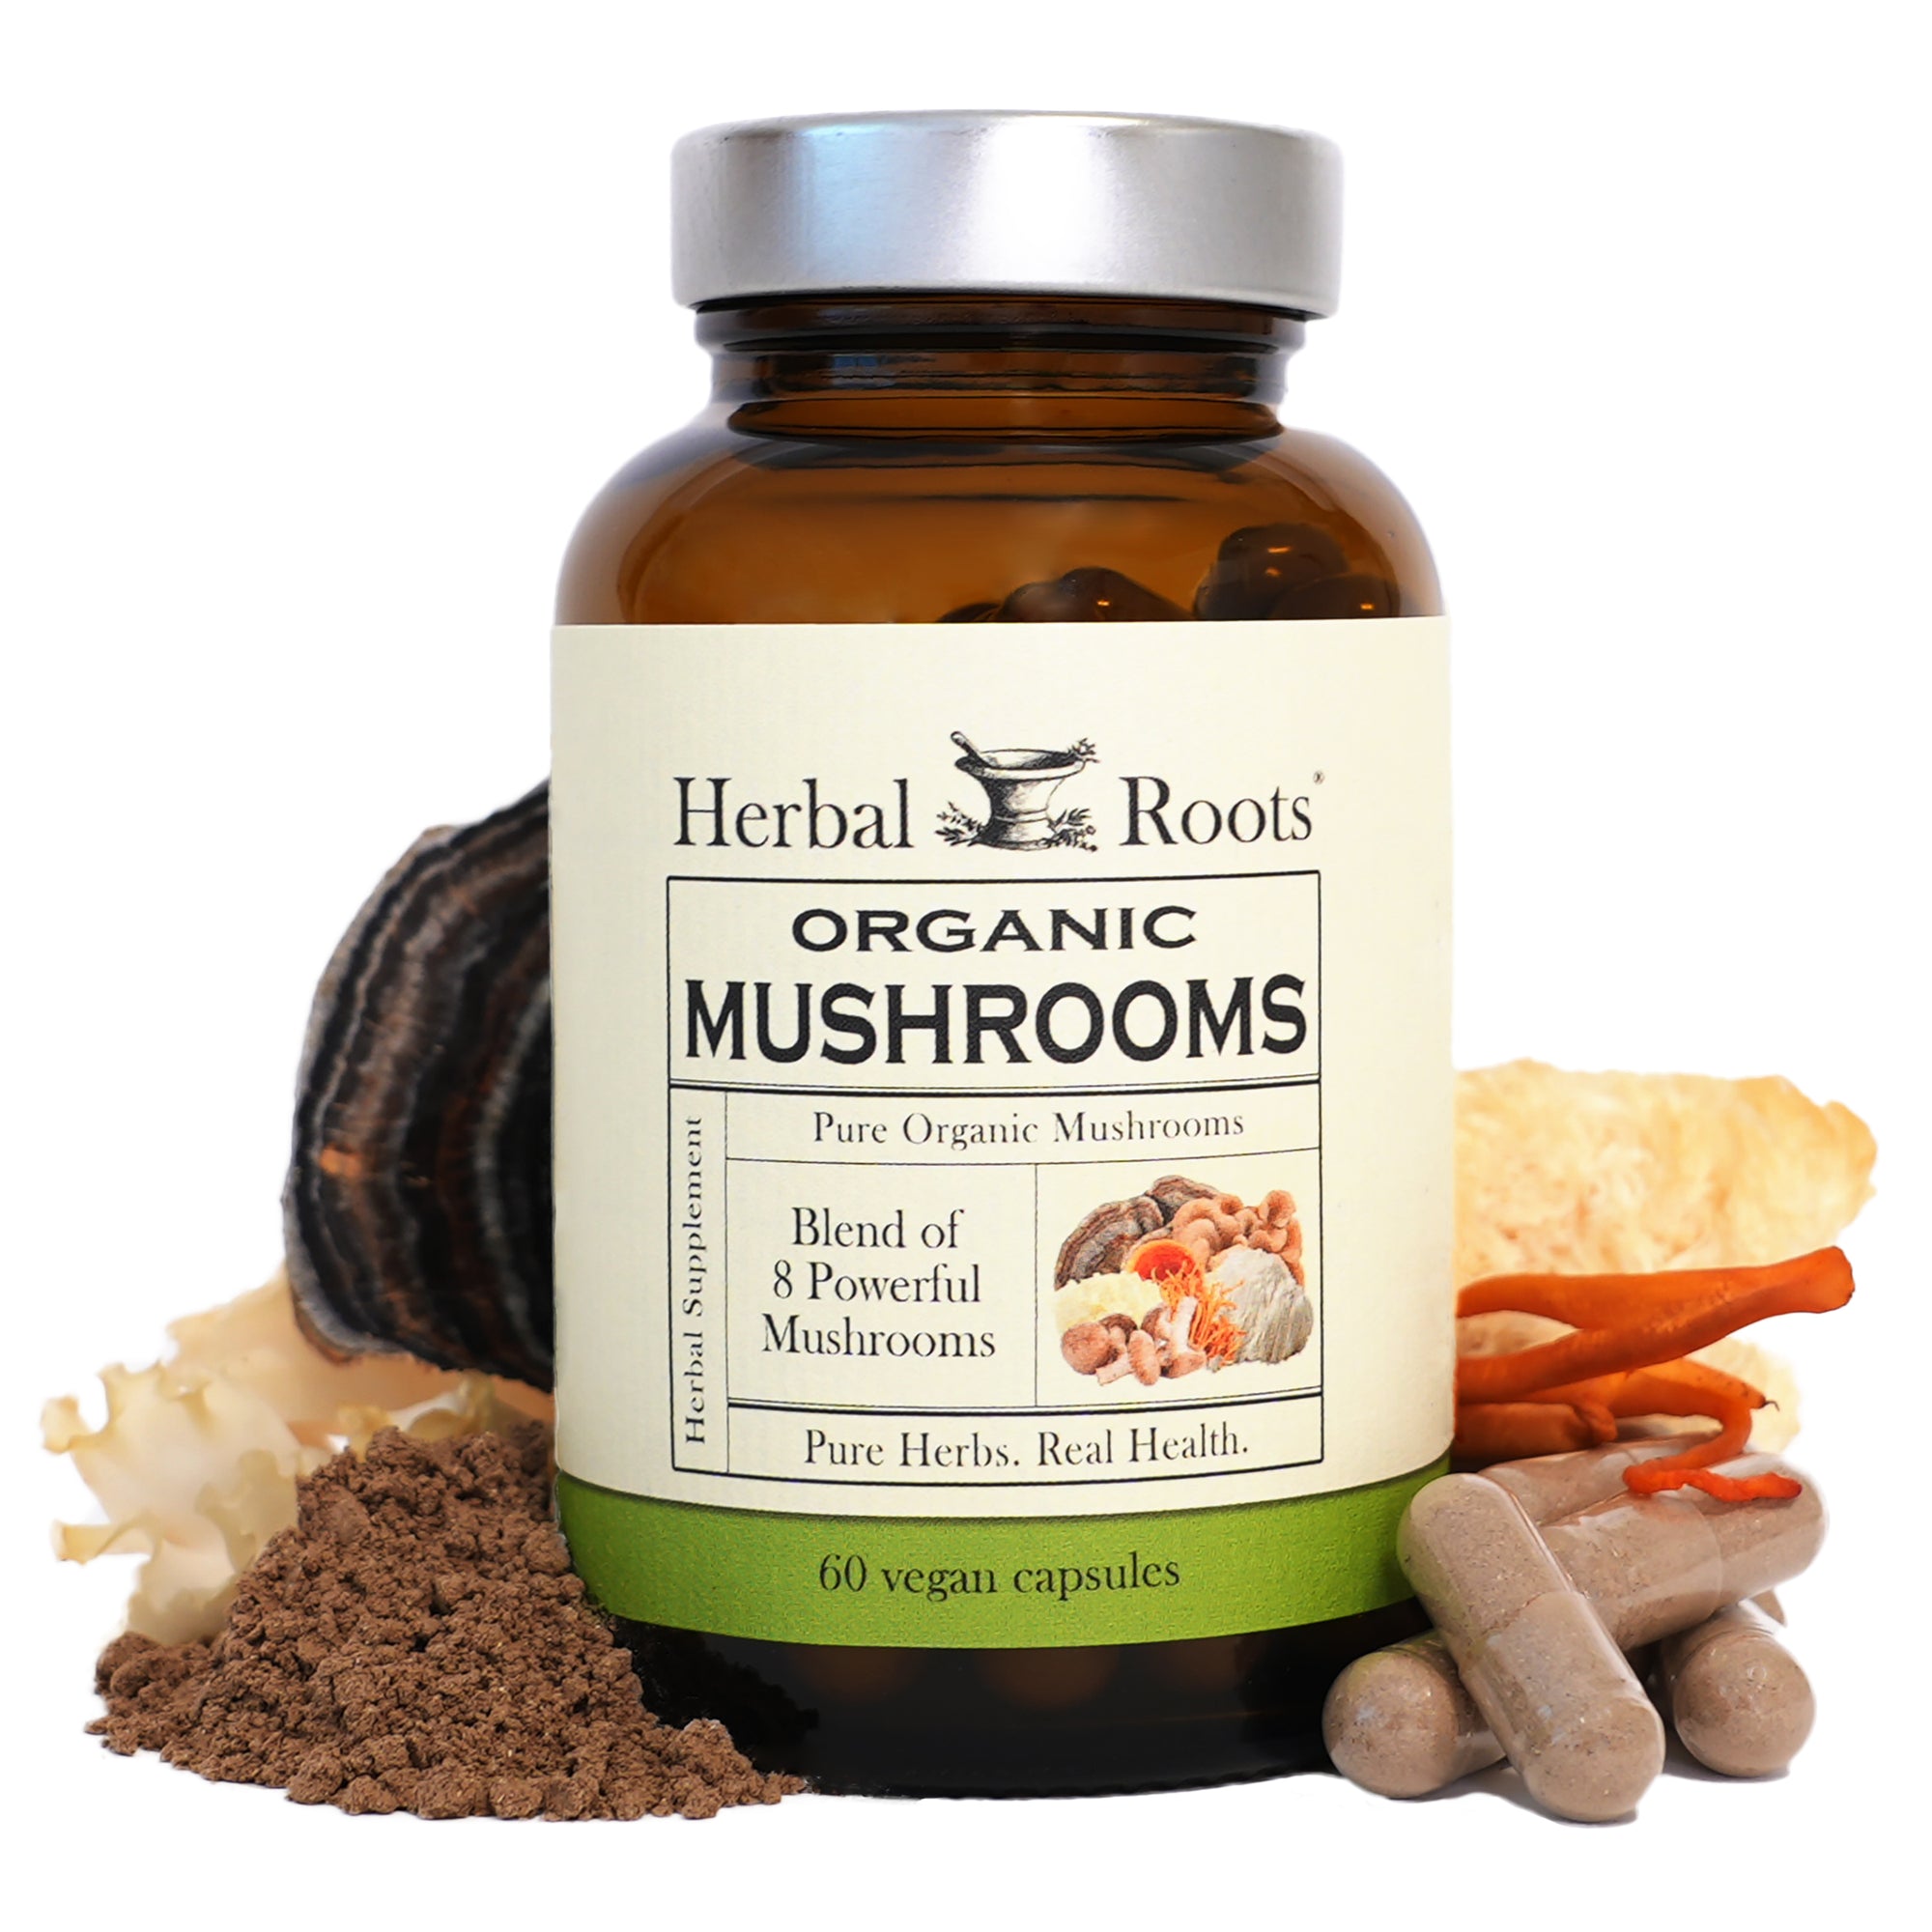 Bottle of Herbal Roots Organic Mushrooms. The bottle is surrounded by a variety of mushrooms. There are a few capsules on the right and powder on the left